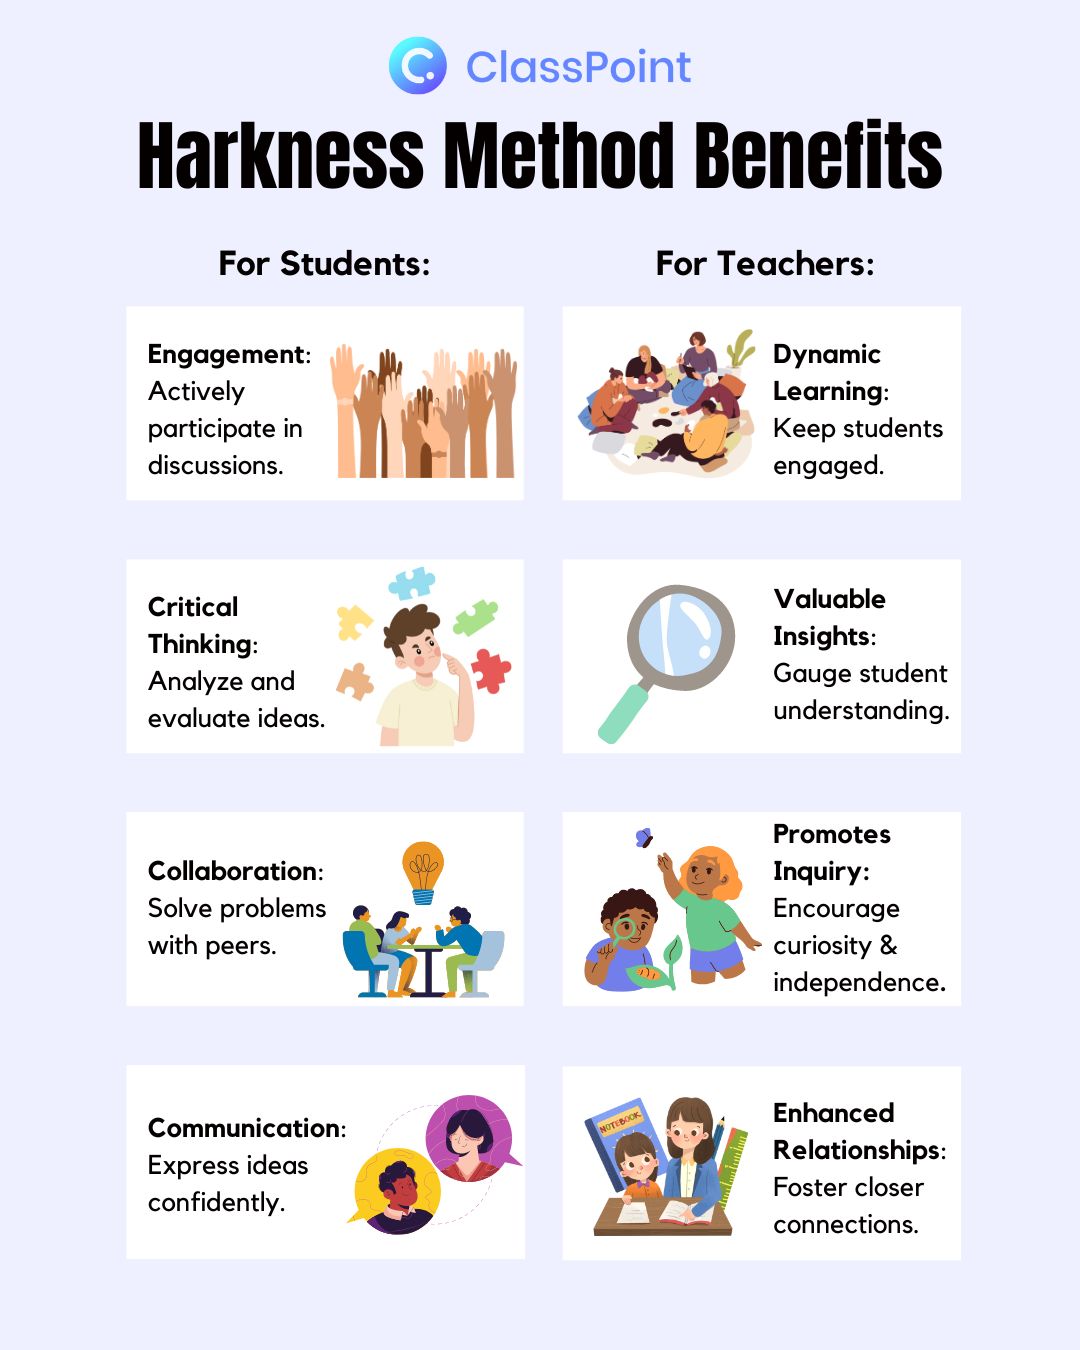 Benefits of the Harkness Method